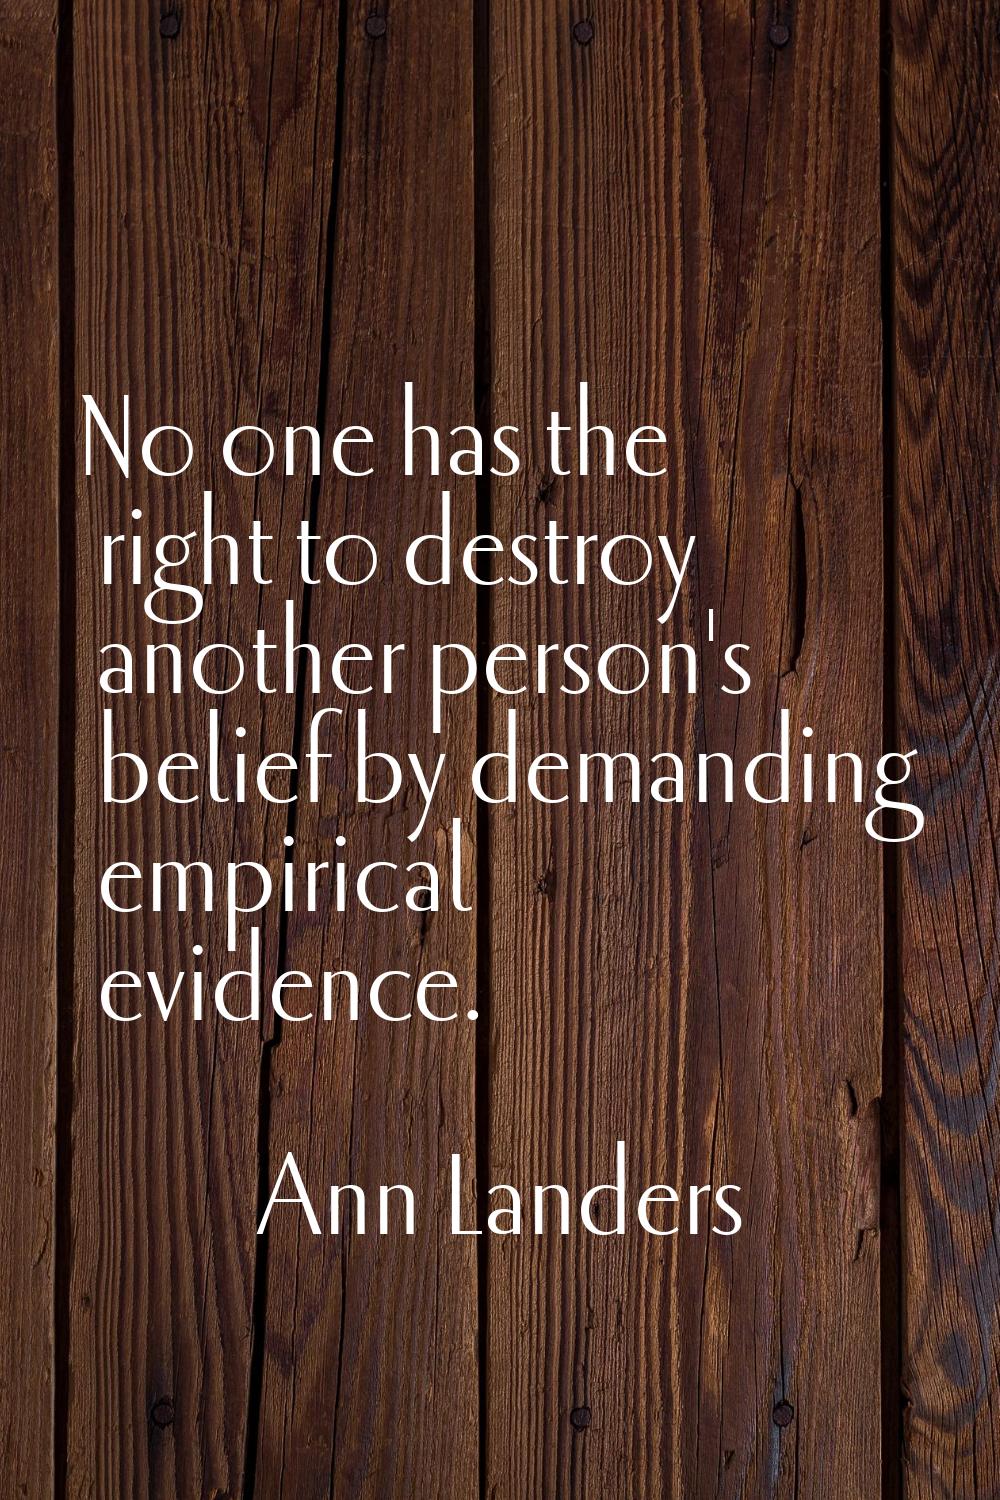 No one has the right to destroy another person's belief by demanding empirical evidence.